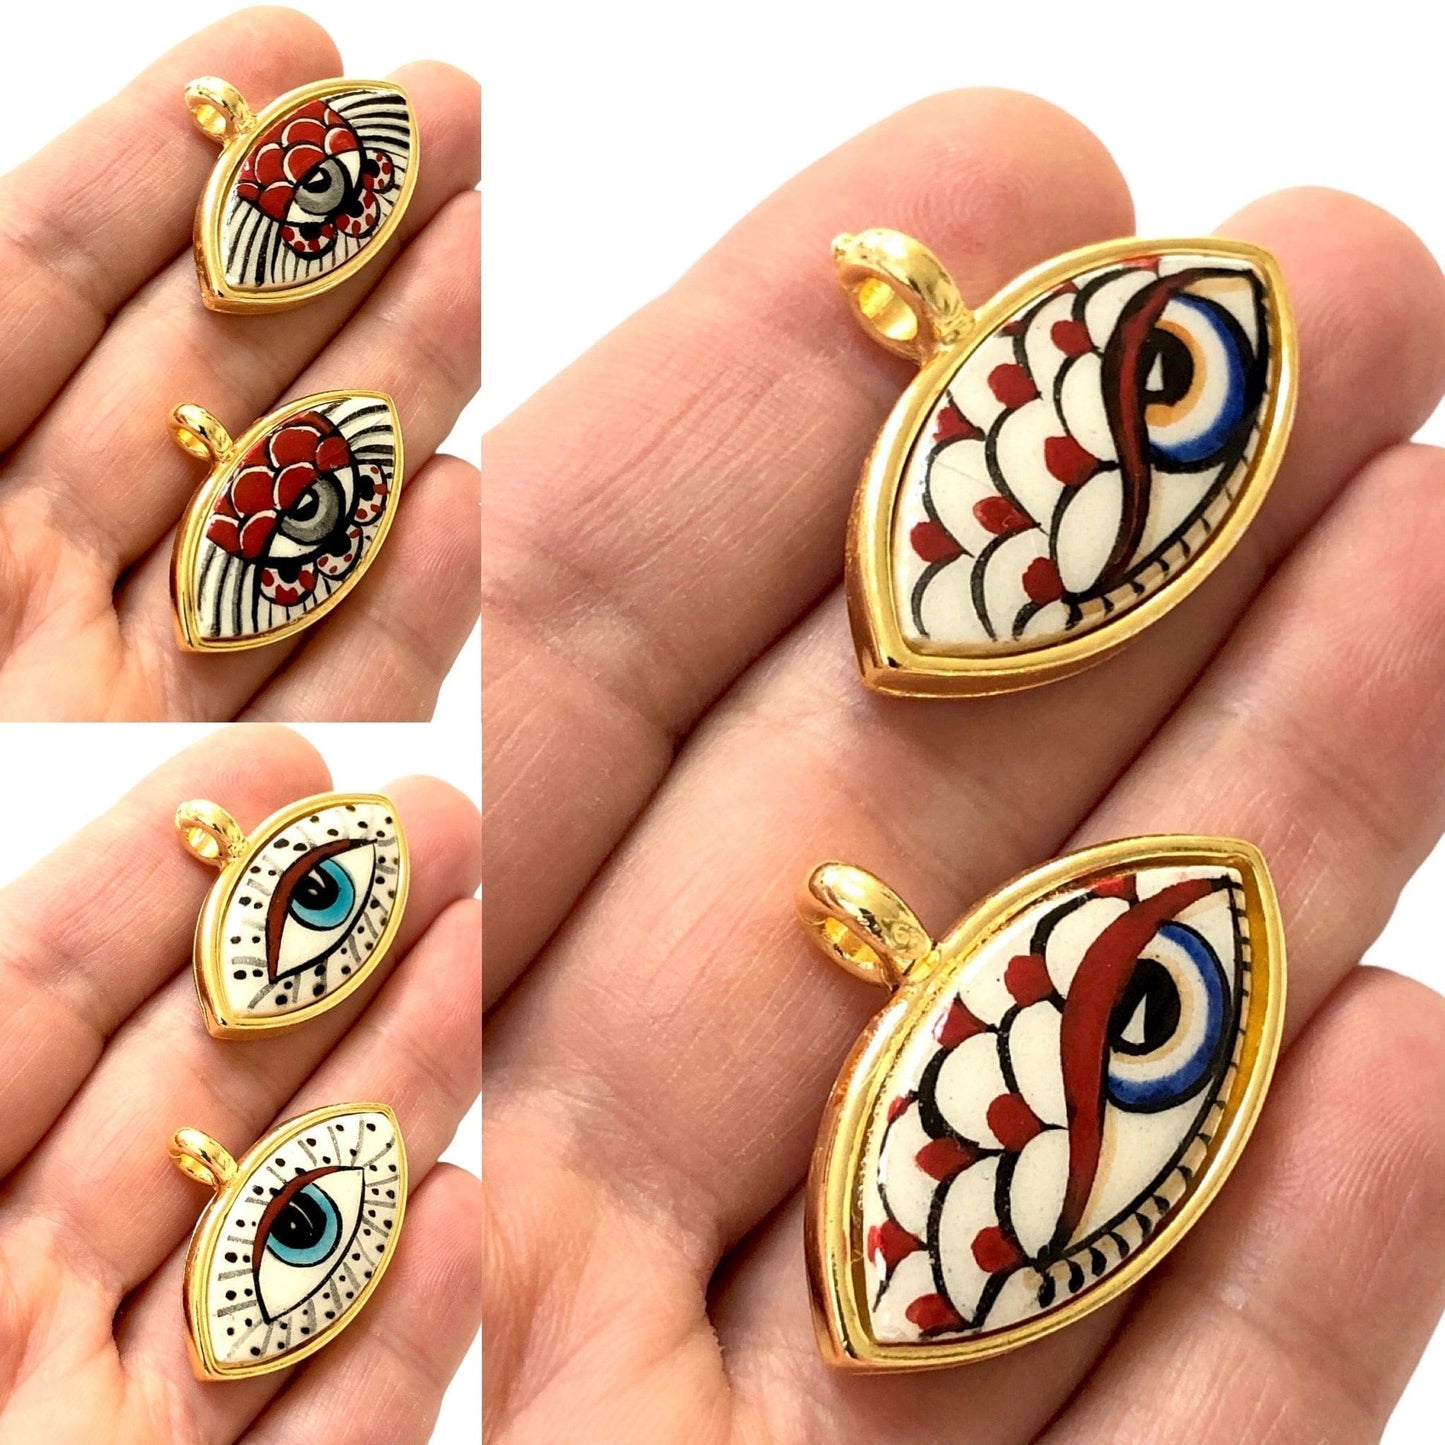 Large Gold Plated Framed Hand Painted Ceramic Eye Pendant-029